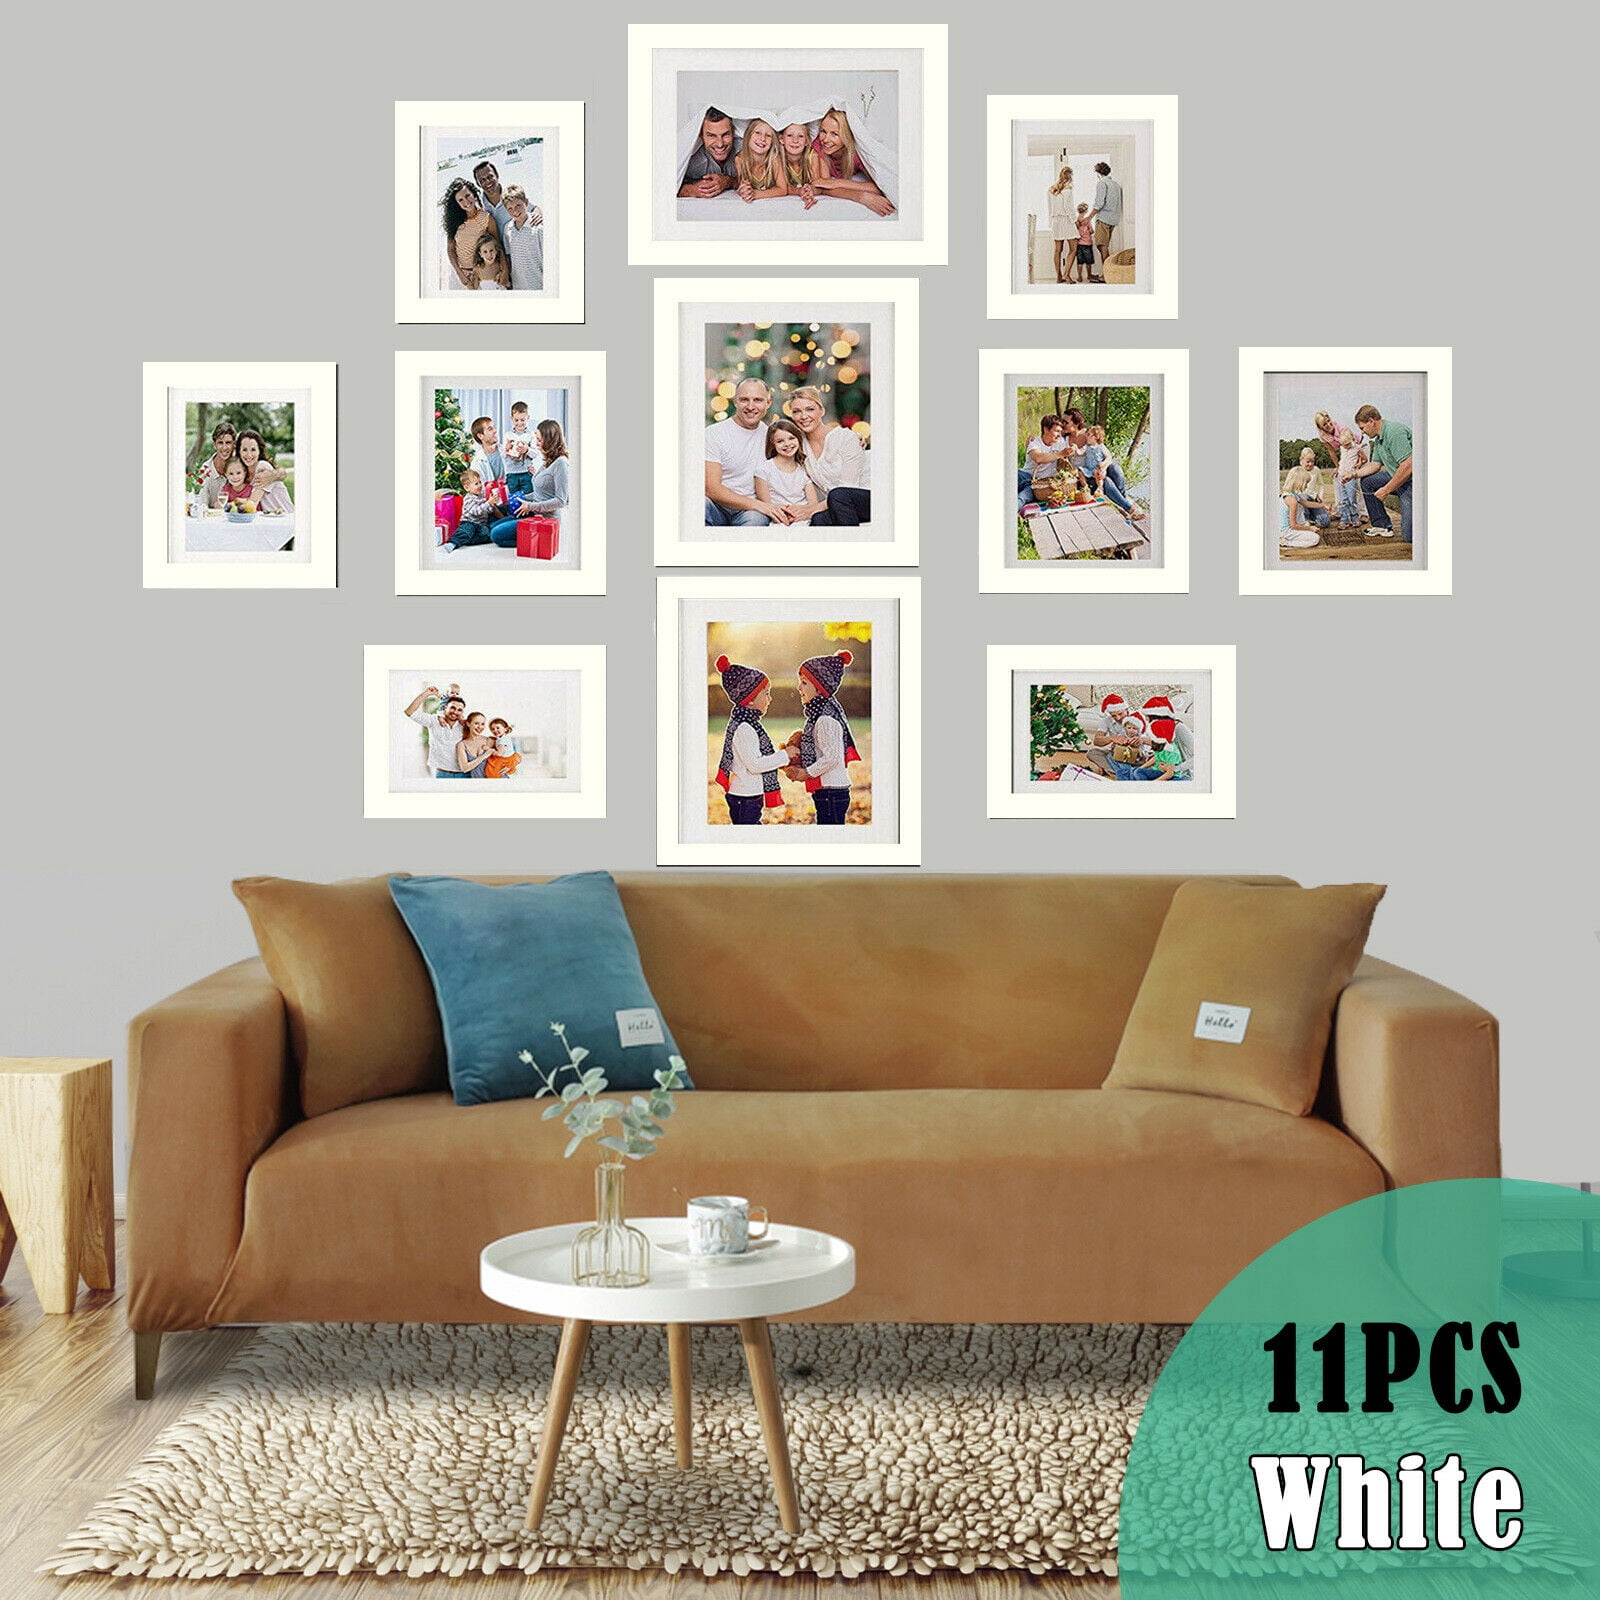 Collage Mat Board for 2-4”x6” Picture The Display Guys~ 4 Sets 8x10 inch White Solid Pine Wood Photo Frame With White Core Mat Boards for 5”x7” Picture White Luxury Made Affordable jpi display Real Glass